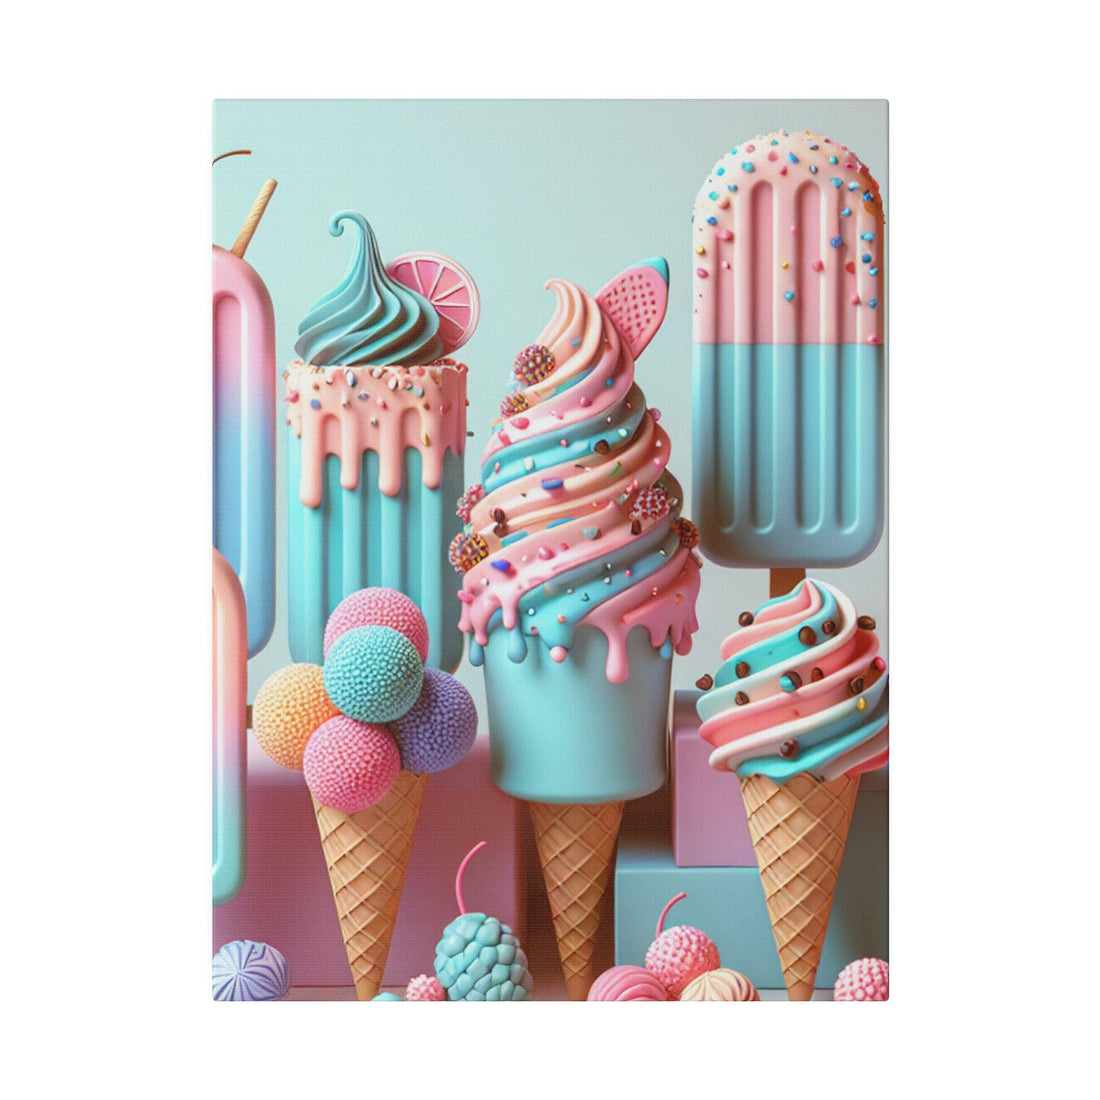 "Sweet Serenity: The Ice Cream Dreams Canvas Wall Art Collection" - The Alice Gallery